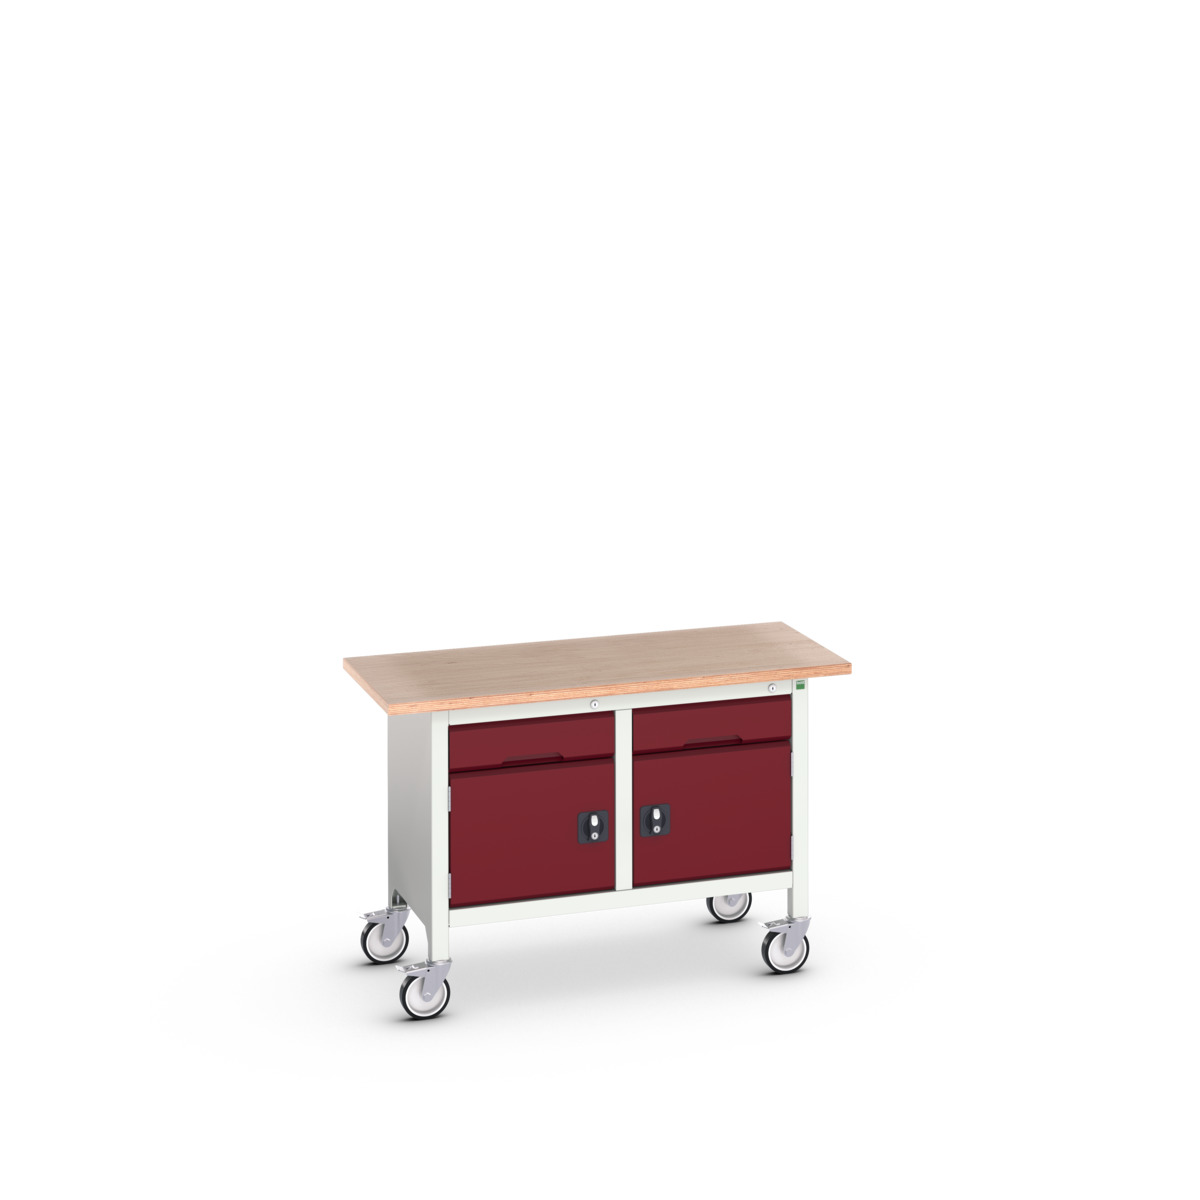 16923201.24 - verso mobile storage bench (mpx)